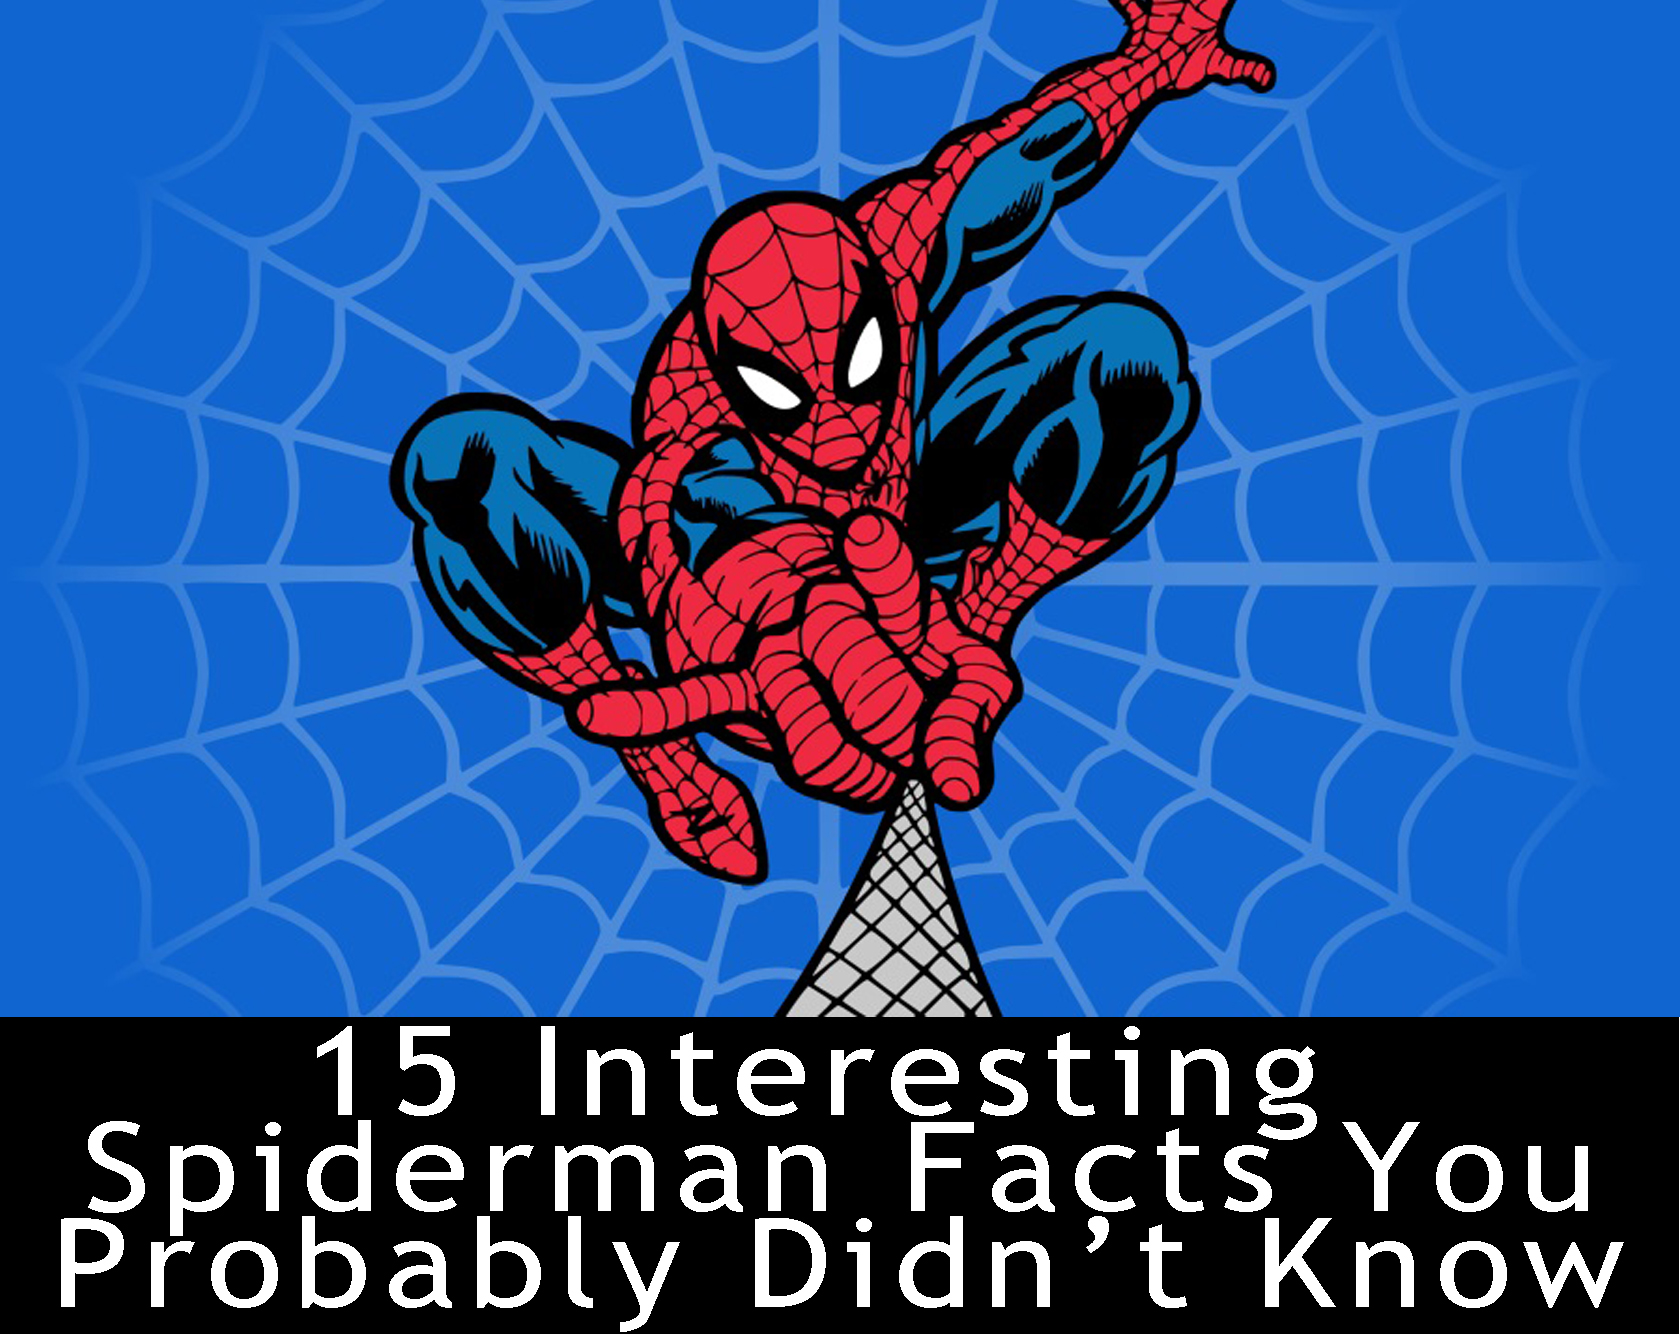 15 Spiderman Facts We Bet You Didn’t Know – #7 is Shocking